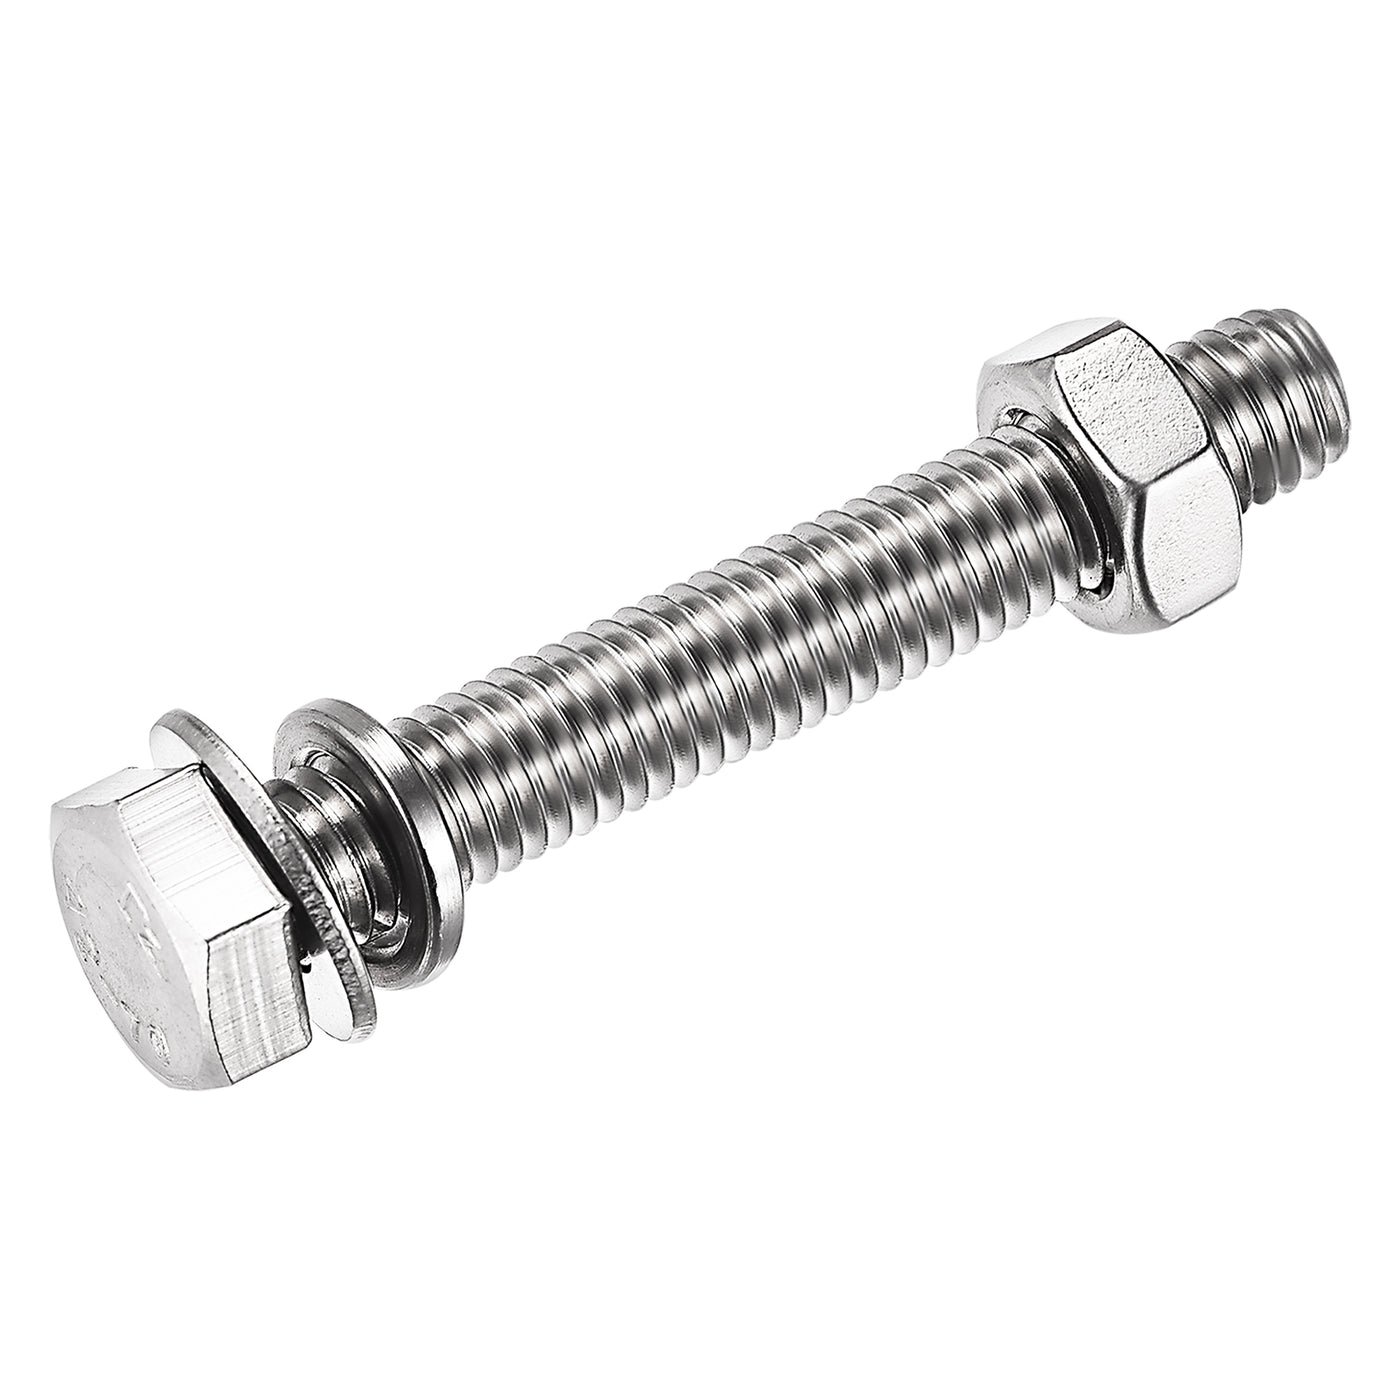 Uxcell Uxcell M8 x 90mm Hex Head Screws Bolts, Nuts, Flat & Lock Washers Kits, 304 Stainless Steel Fully Thread Hexagon Bolts 6 Sets